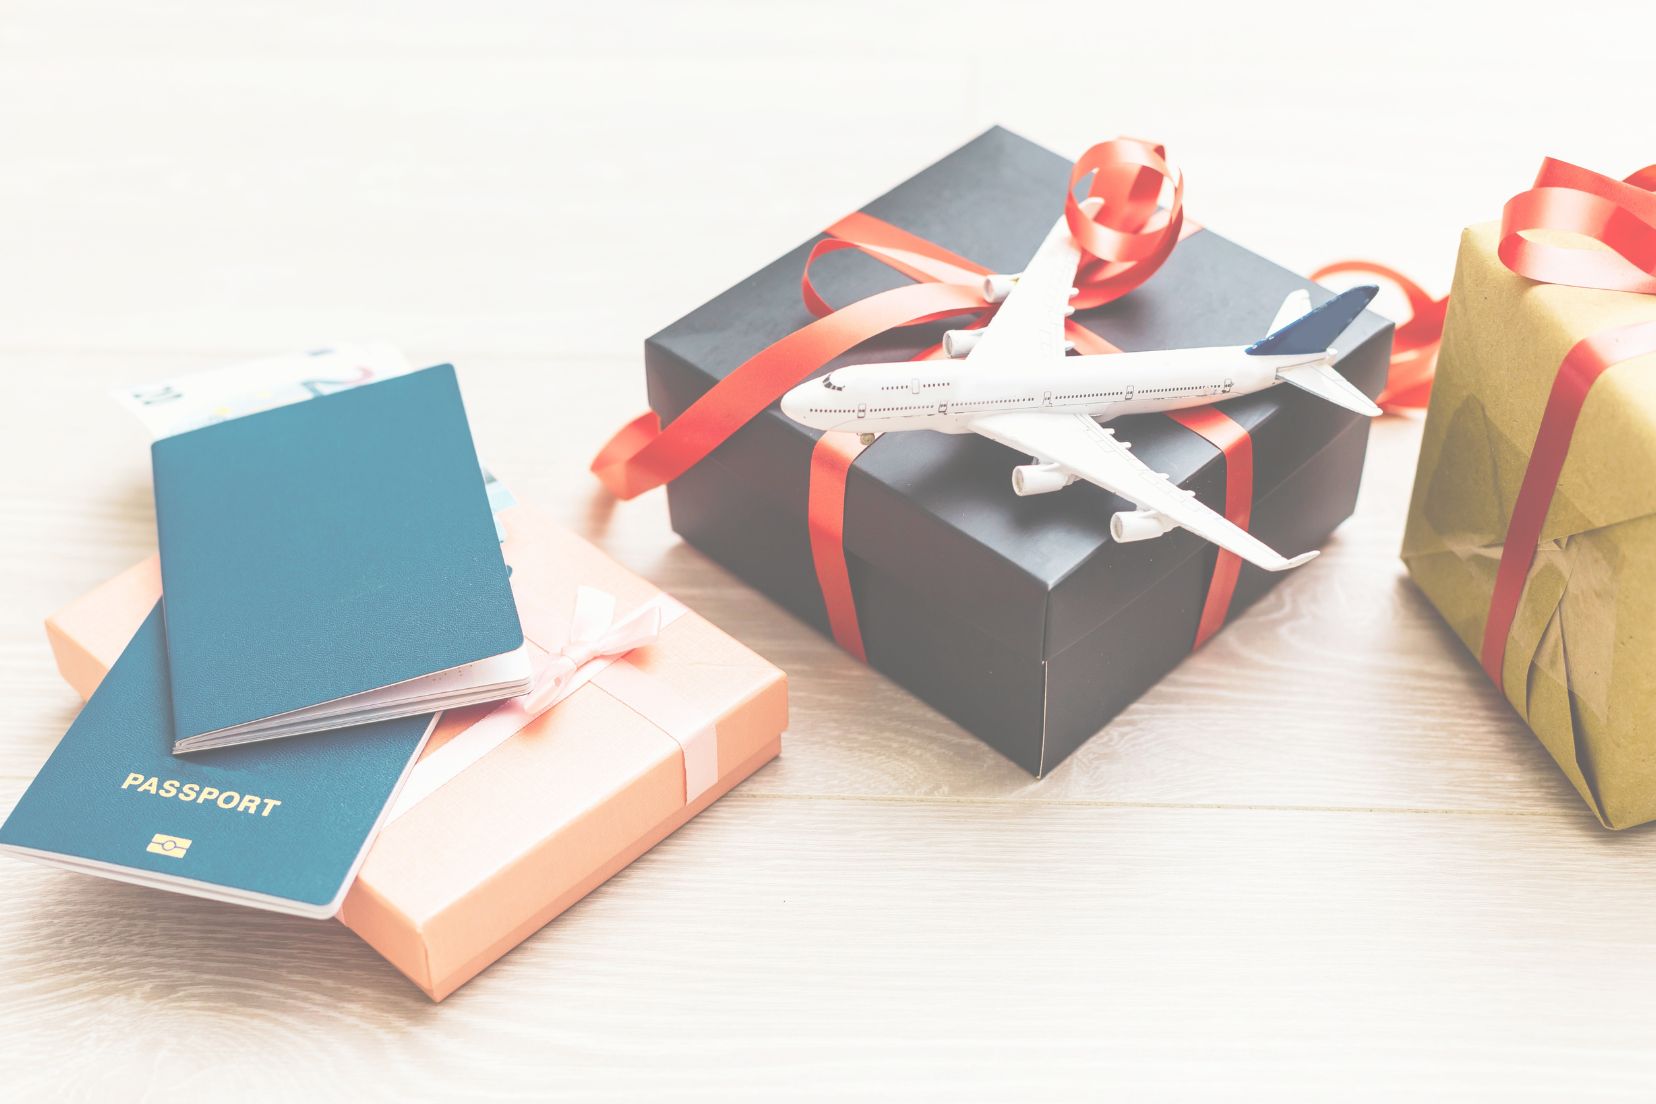 Travel Gift Image with gifts and passports beside them